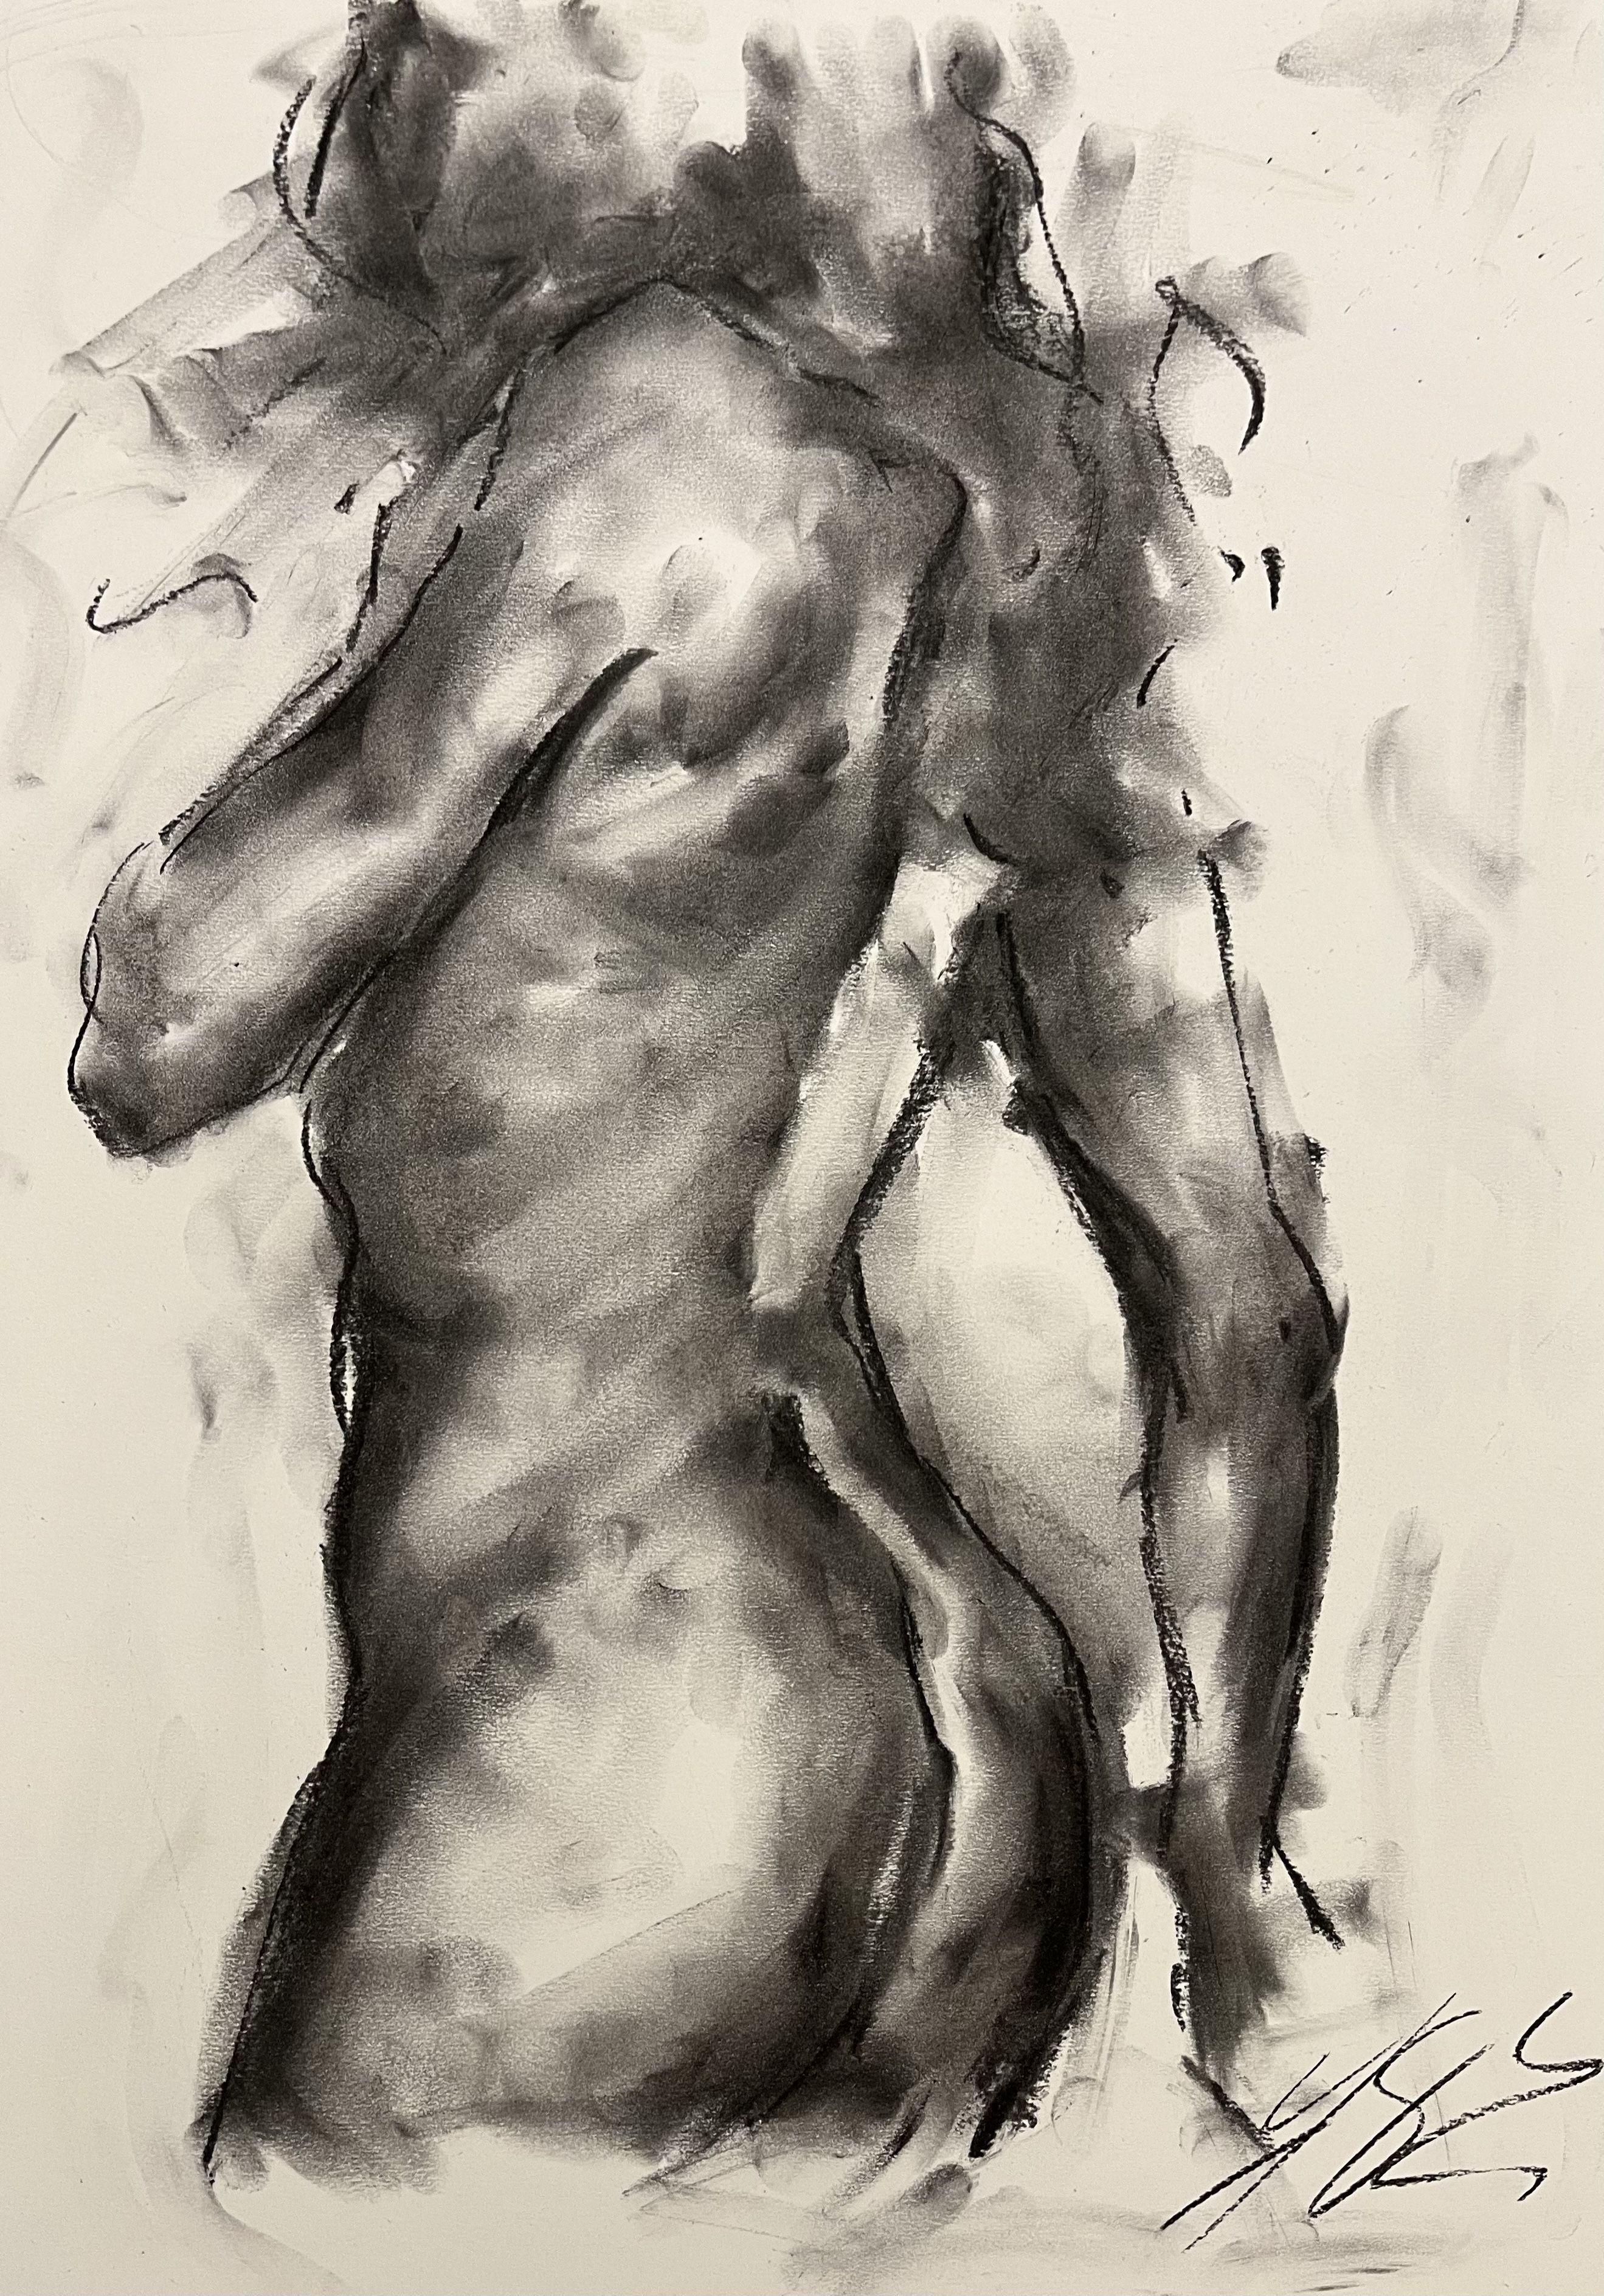 Life, Drawing, Charcoal on Paper - Art by James Shipton